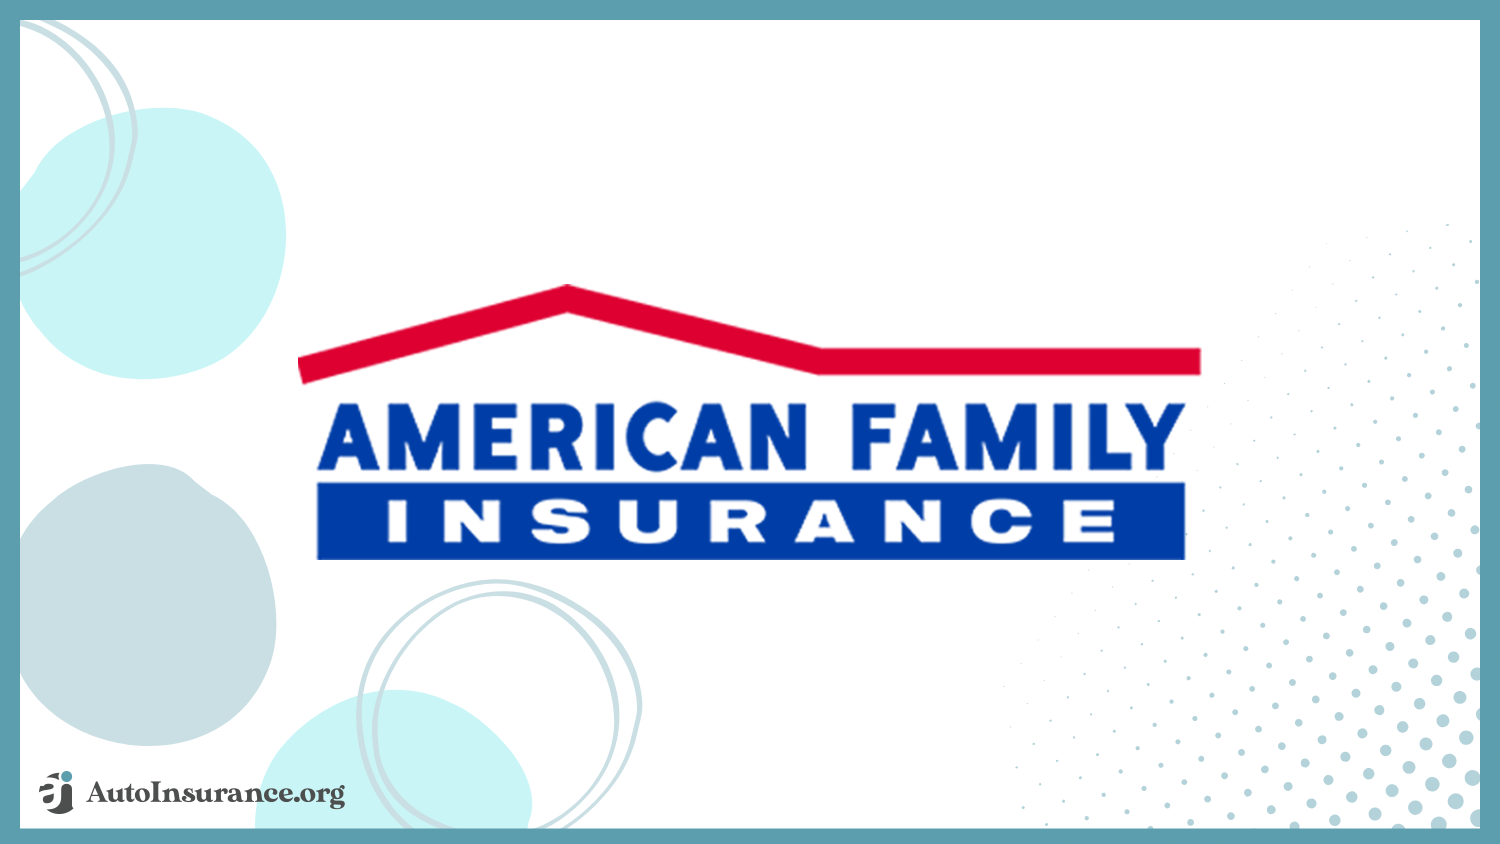 American Family: Best Auto Insurance Companies That Don't Check Accidents Reported by CARFAX